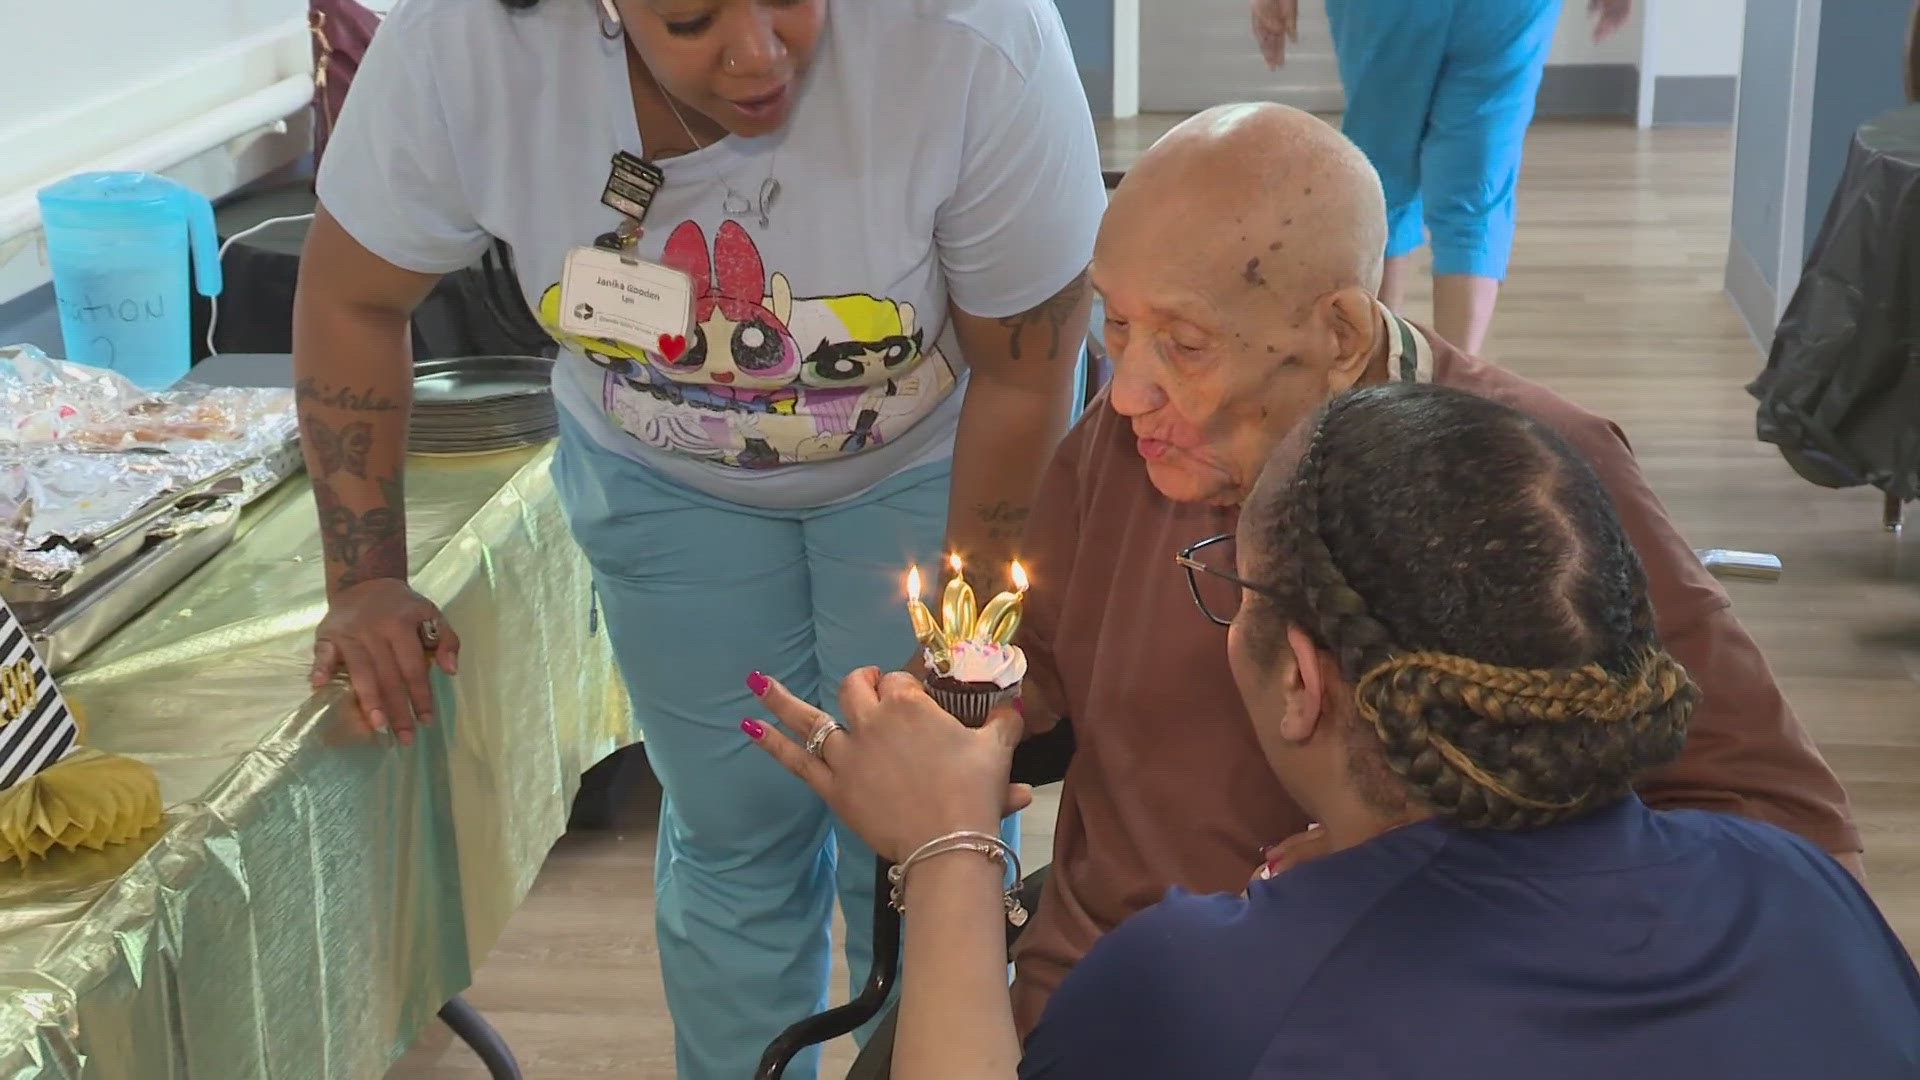 Born in Puerto Rico in 1924, Jose worked for LTV Steel until retirement. He lives at Grande Oaks Pavilion in Oakwood Village, which hosted his May 15 birthday party.